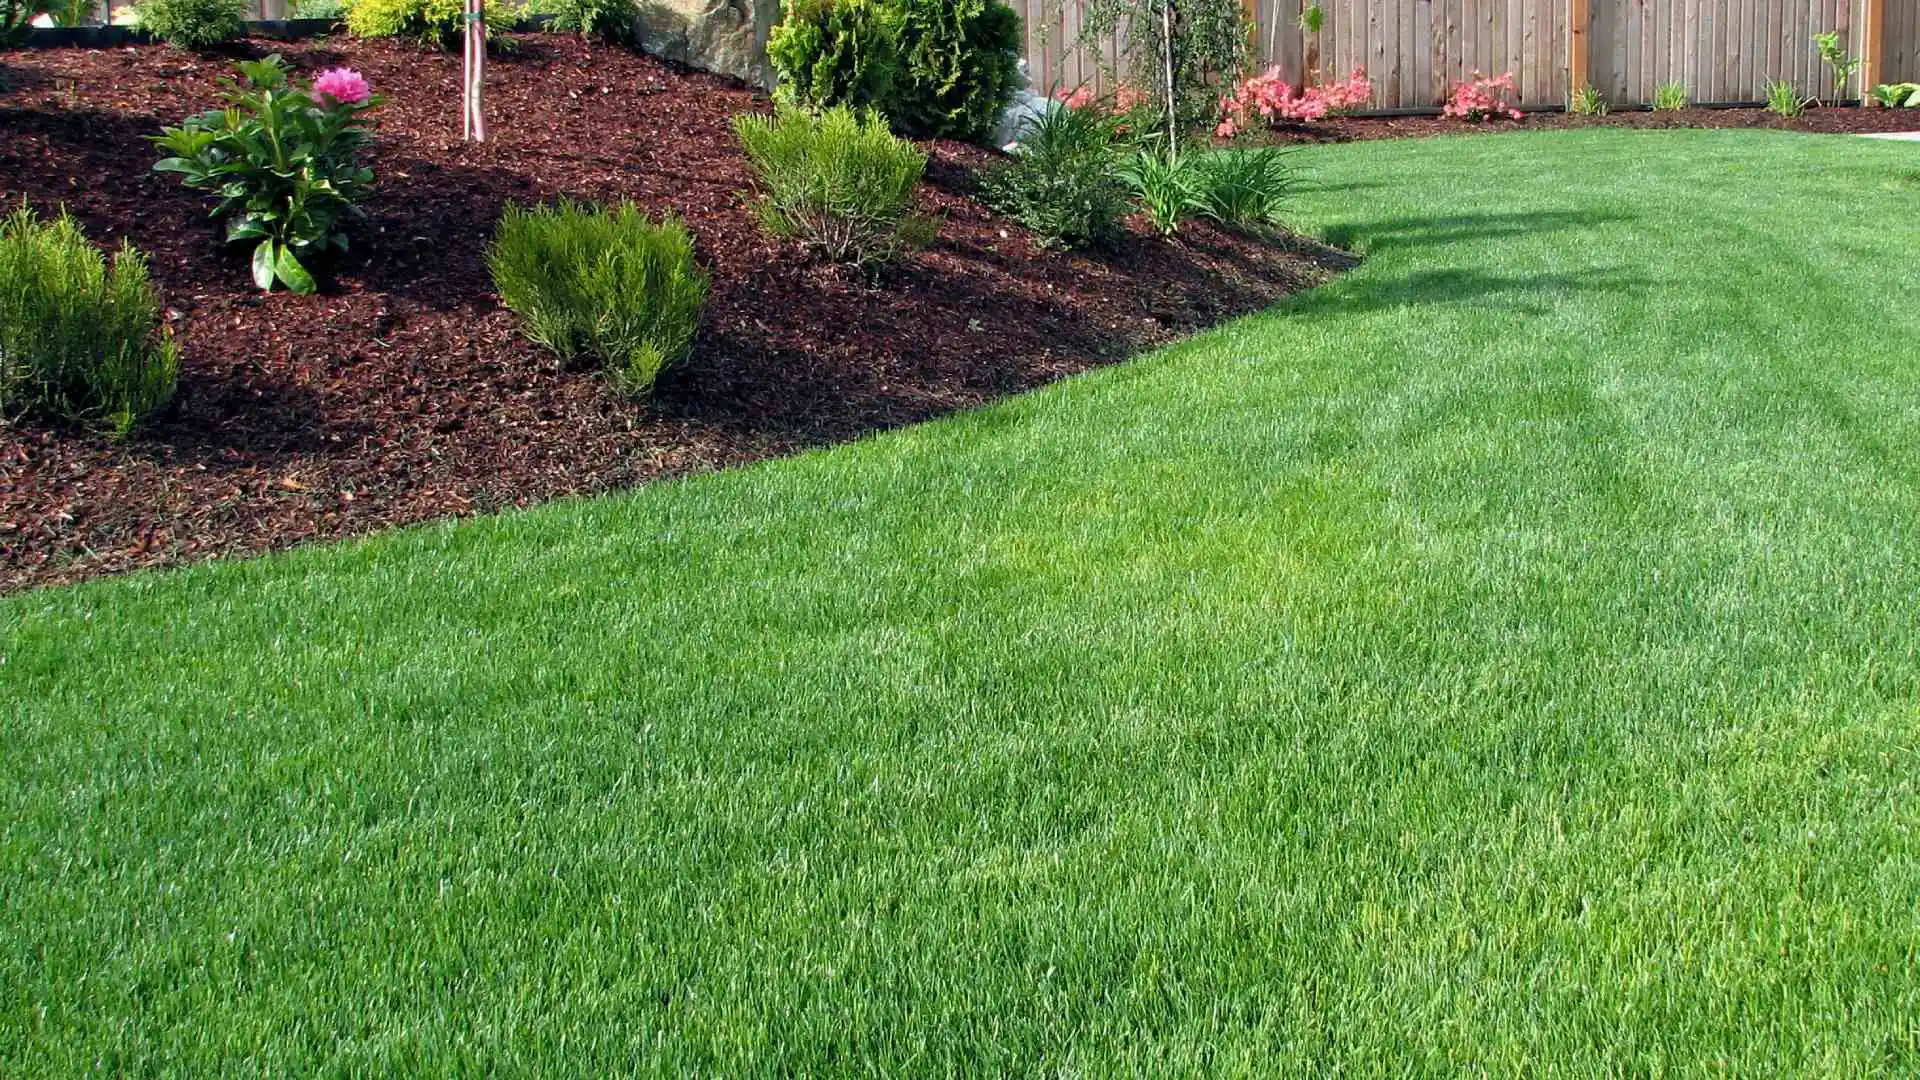 Healthy and maintained lawn and landscape bed in Raymore, MO.